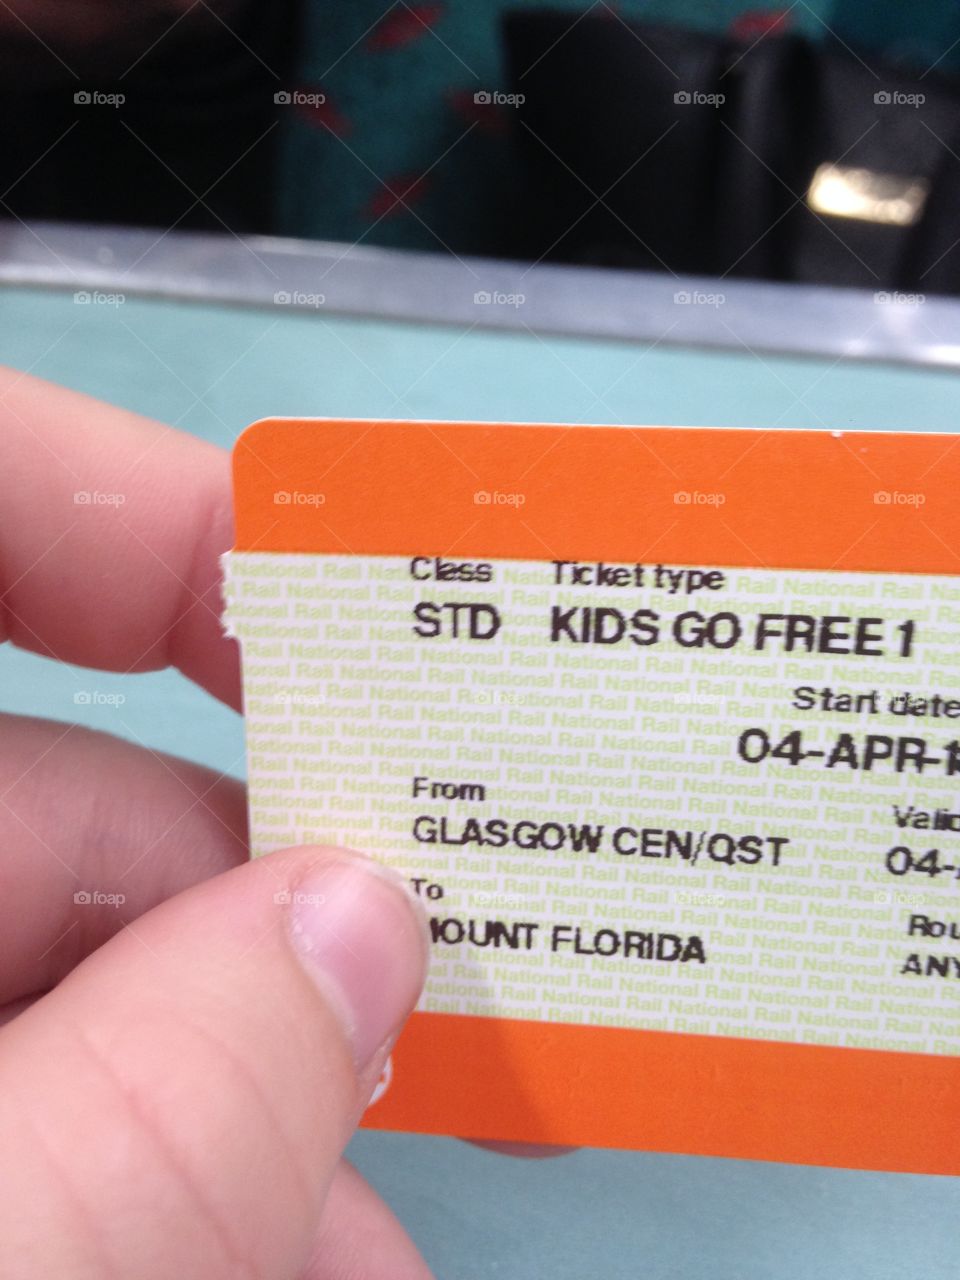 I know this isn't really worthy of this website but I bought a train ticket and I got STD class 